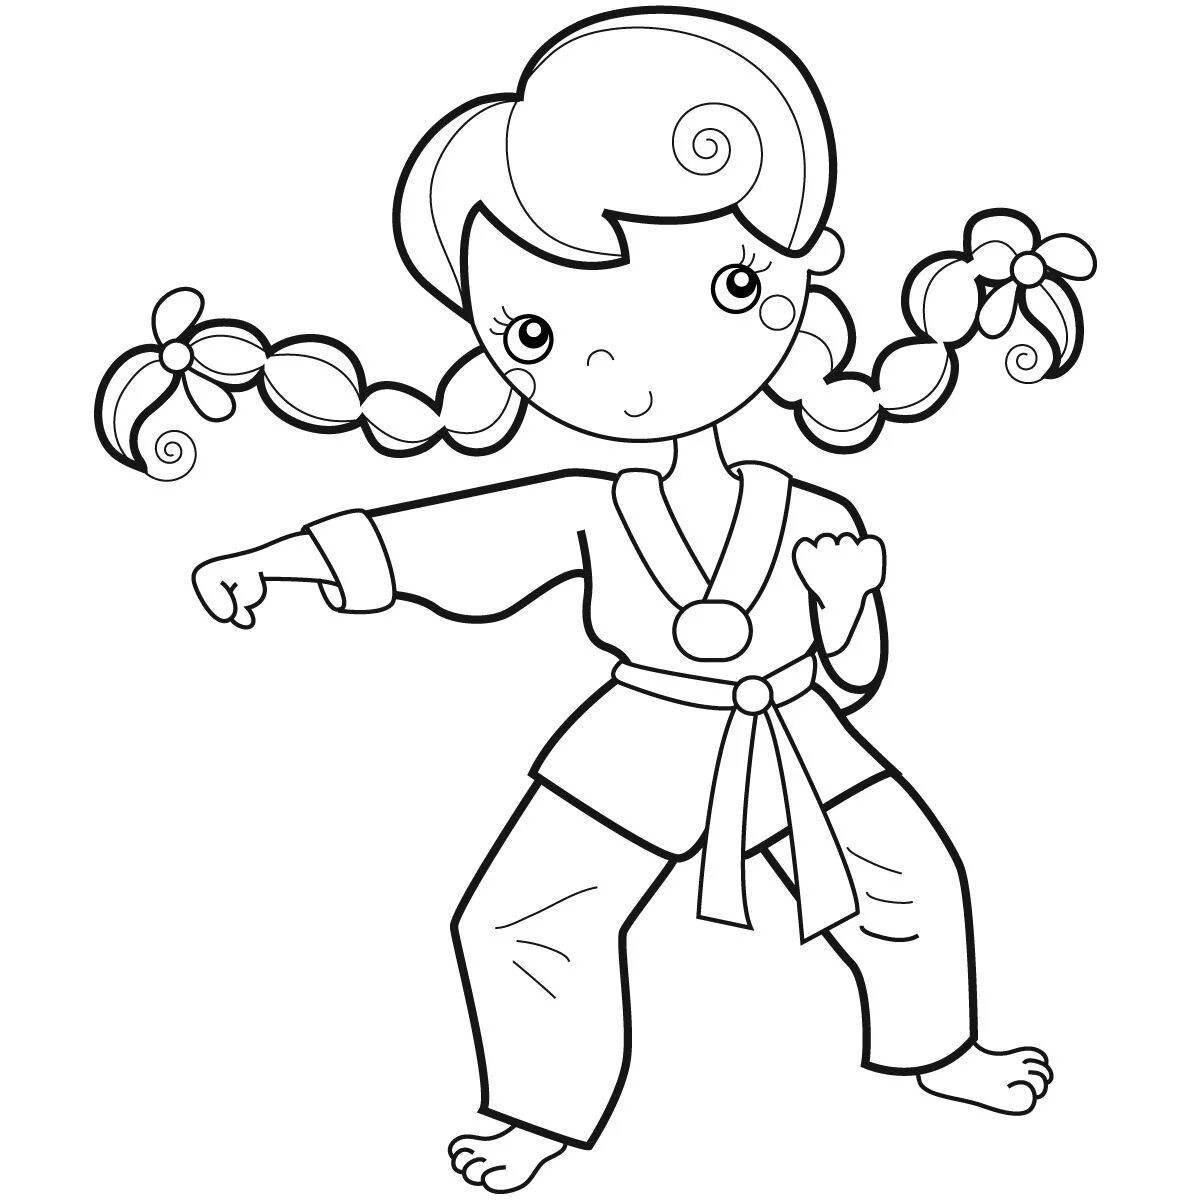 Radiant boxy boo coloring page